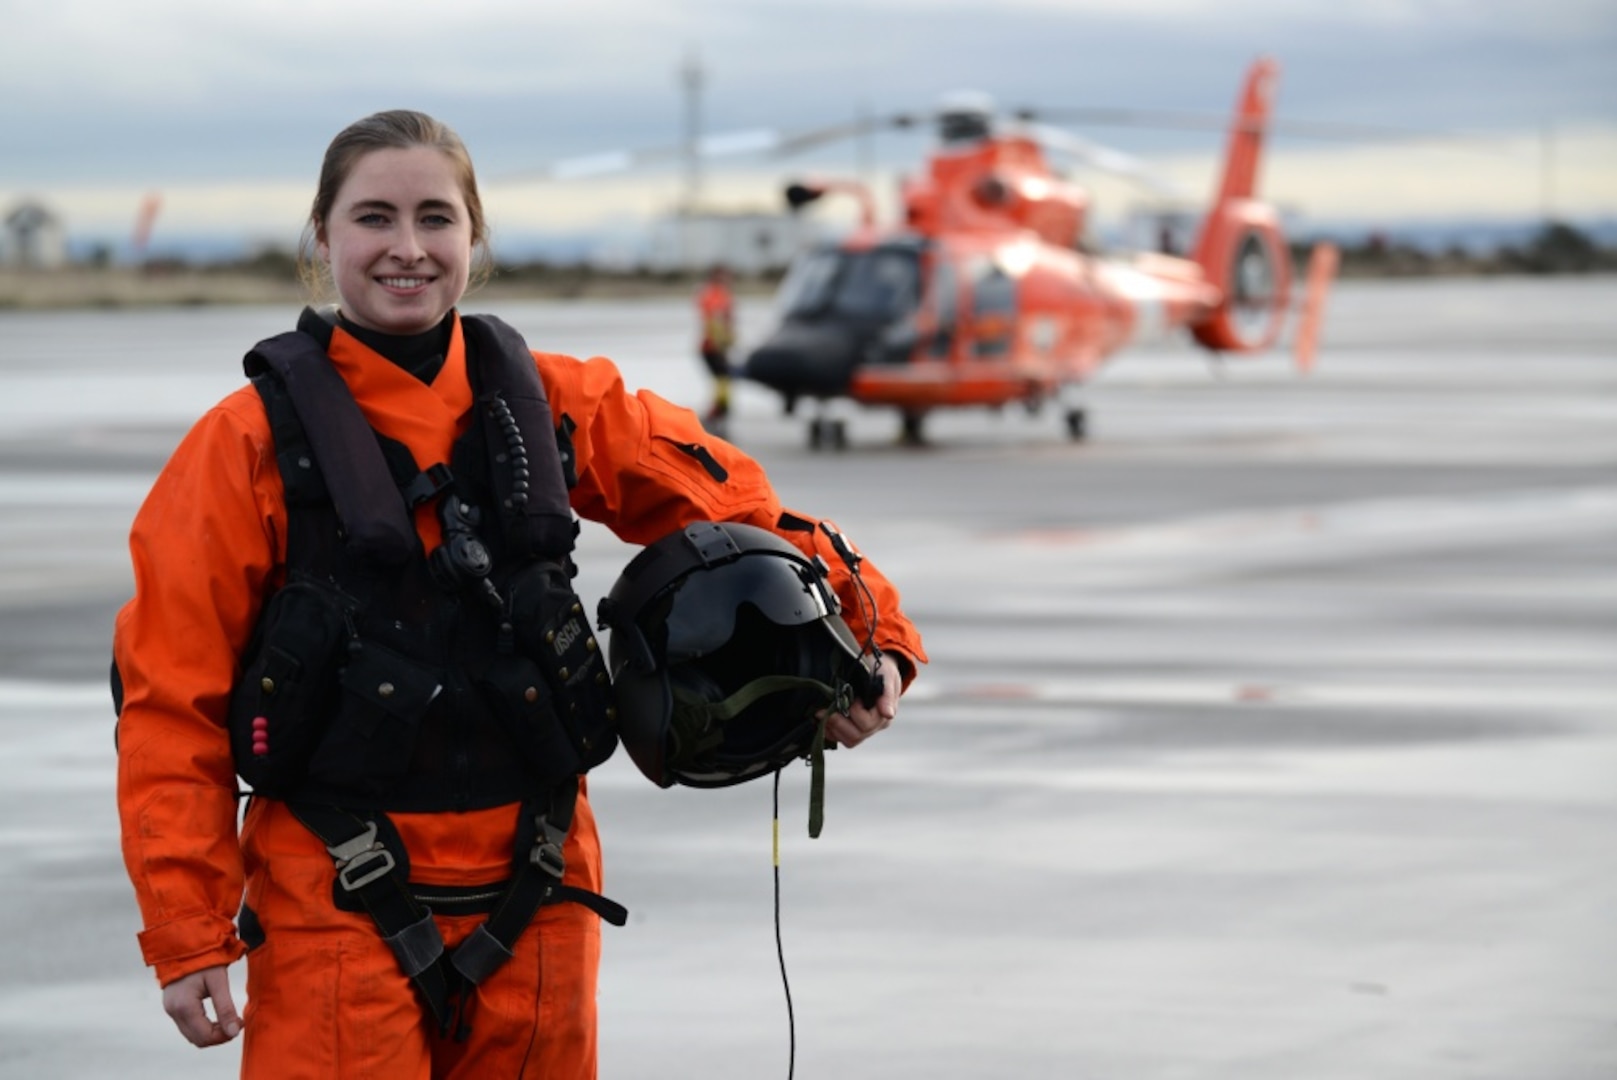 Coast Guard Petty Officer 3rd Class Amber Brewer, an aviation maintenance technician, Air Station Port Angeles, Wash., poses for a picture on the the flight line in front of an MH-65 Dolphin Helicopter, Jan. 26, 2018.

Brewer not only maintains the readiness of the aircraft, but is also a qualified flight mechanic responsible for overseeing the mechanical safety of the helicopter and conducting the essential hoisting operations conducted during rescue swimmer deployments.

U.S. Coast Guard photo by Chief Petty Officer David Mosley